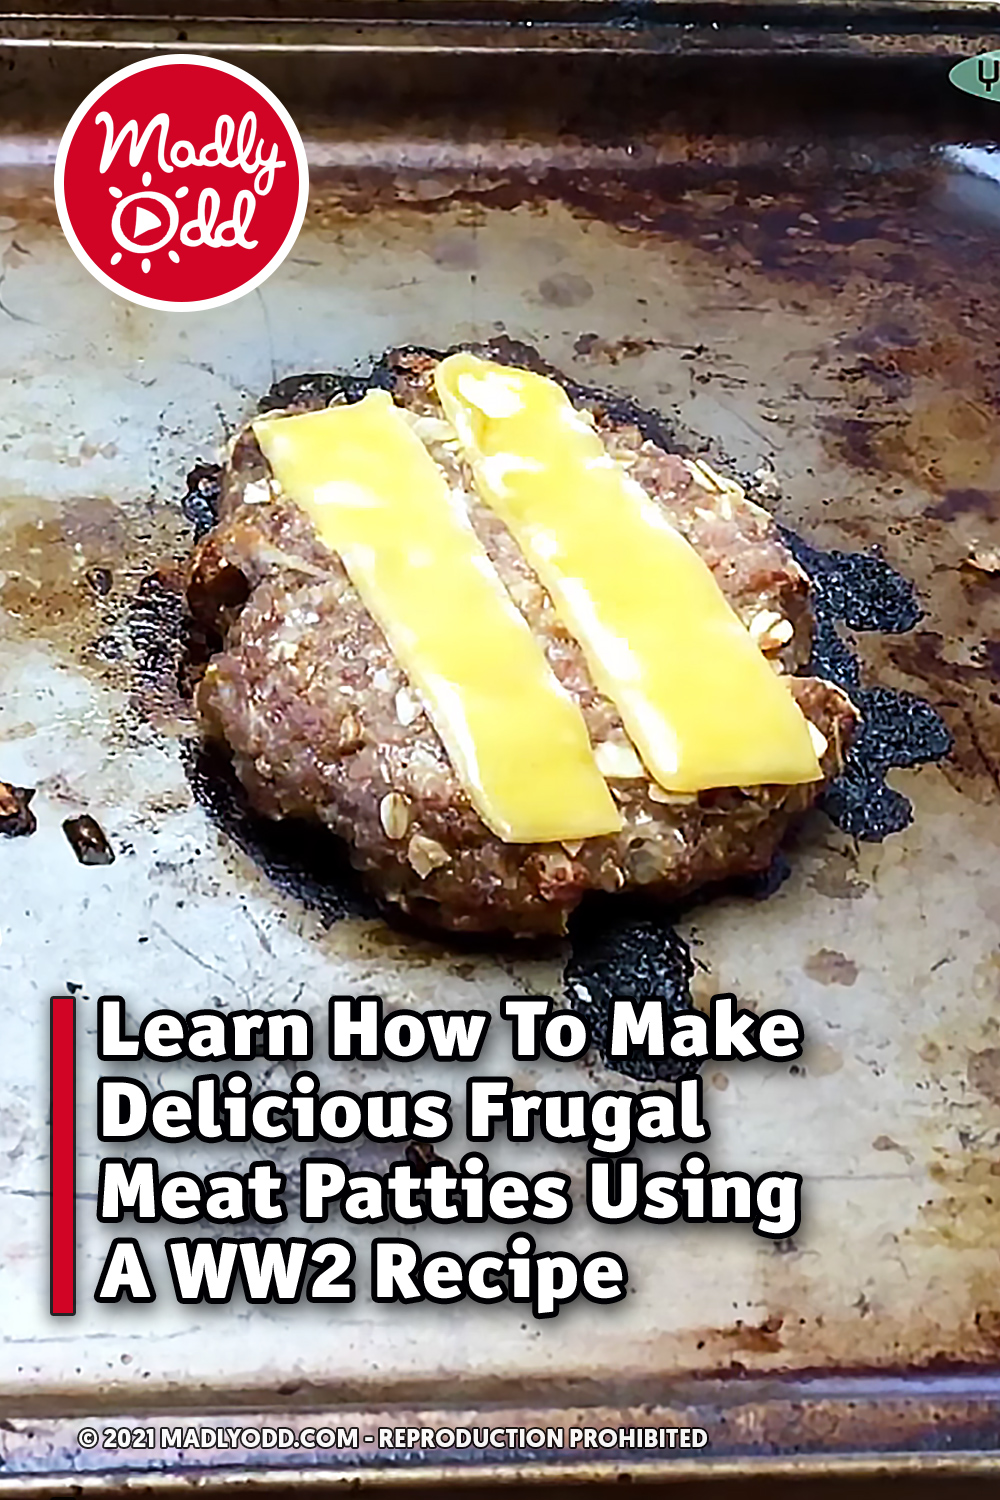 Learn How To Make Delicious Frugal Meat Patties Using A WW2 Recipe